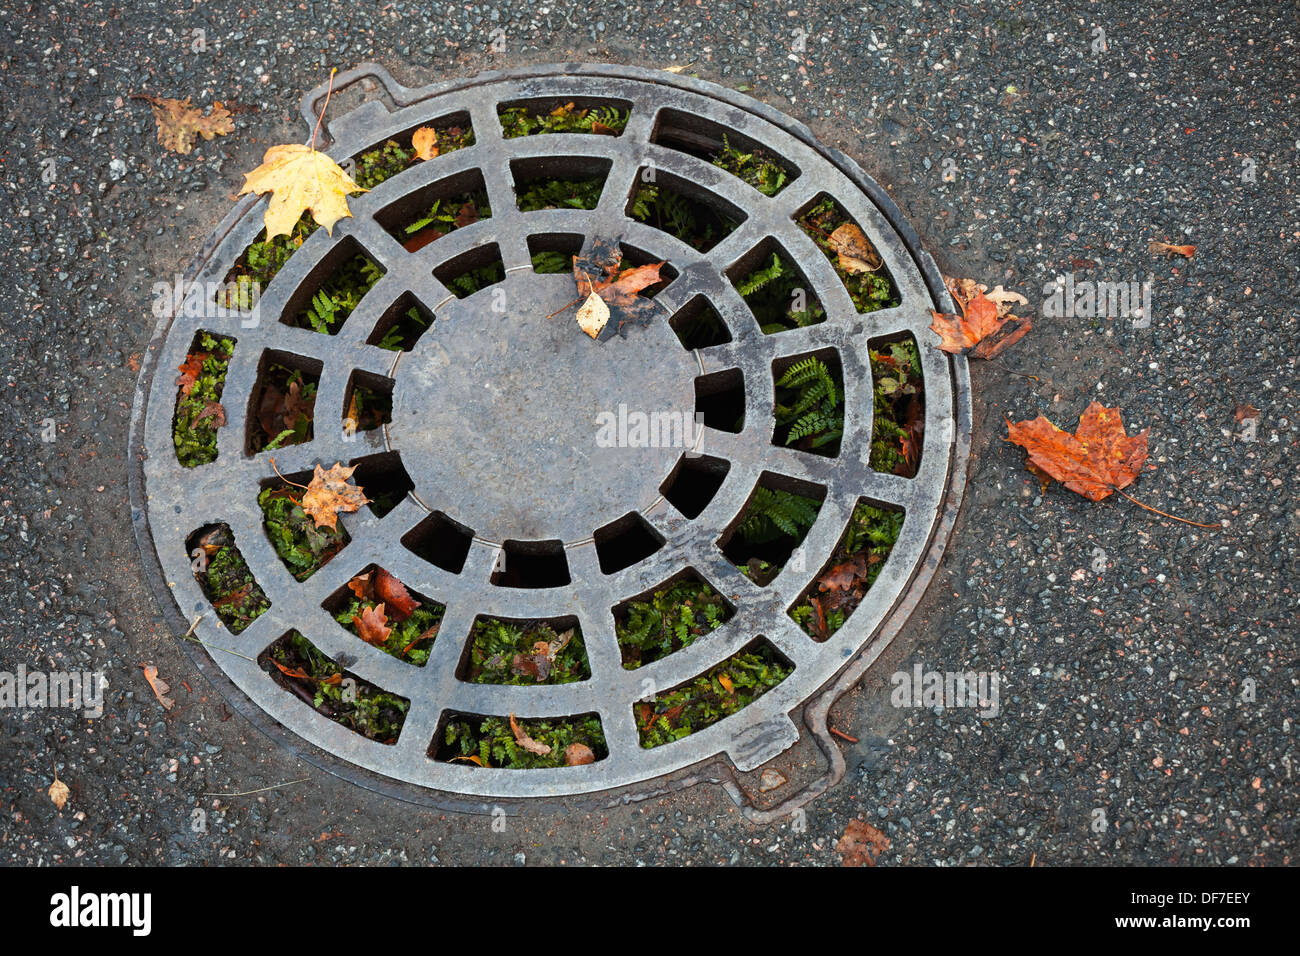 Round sewer manhole on dark asphalt with autumnal leaves and green grass inside Stock Photo